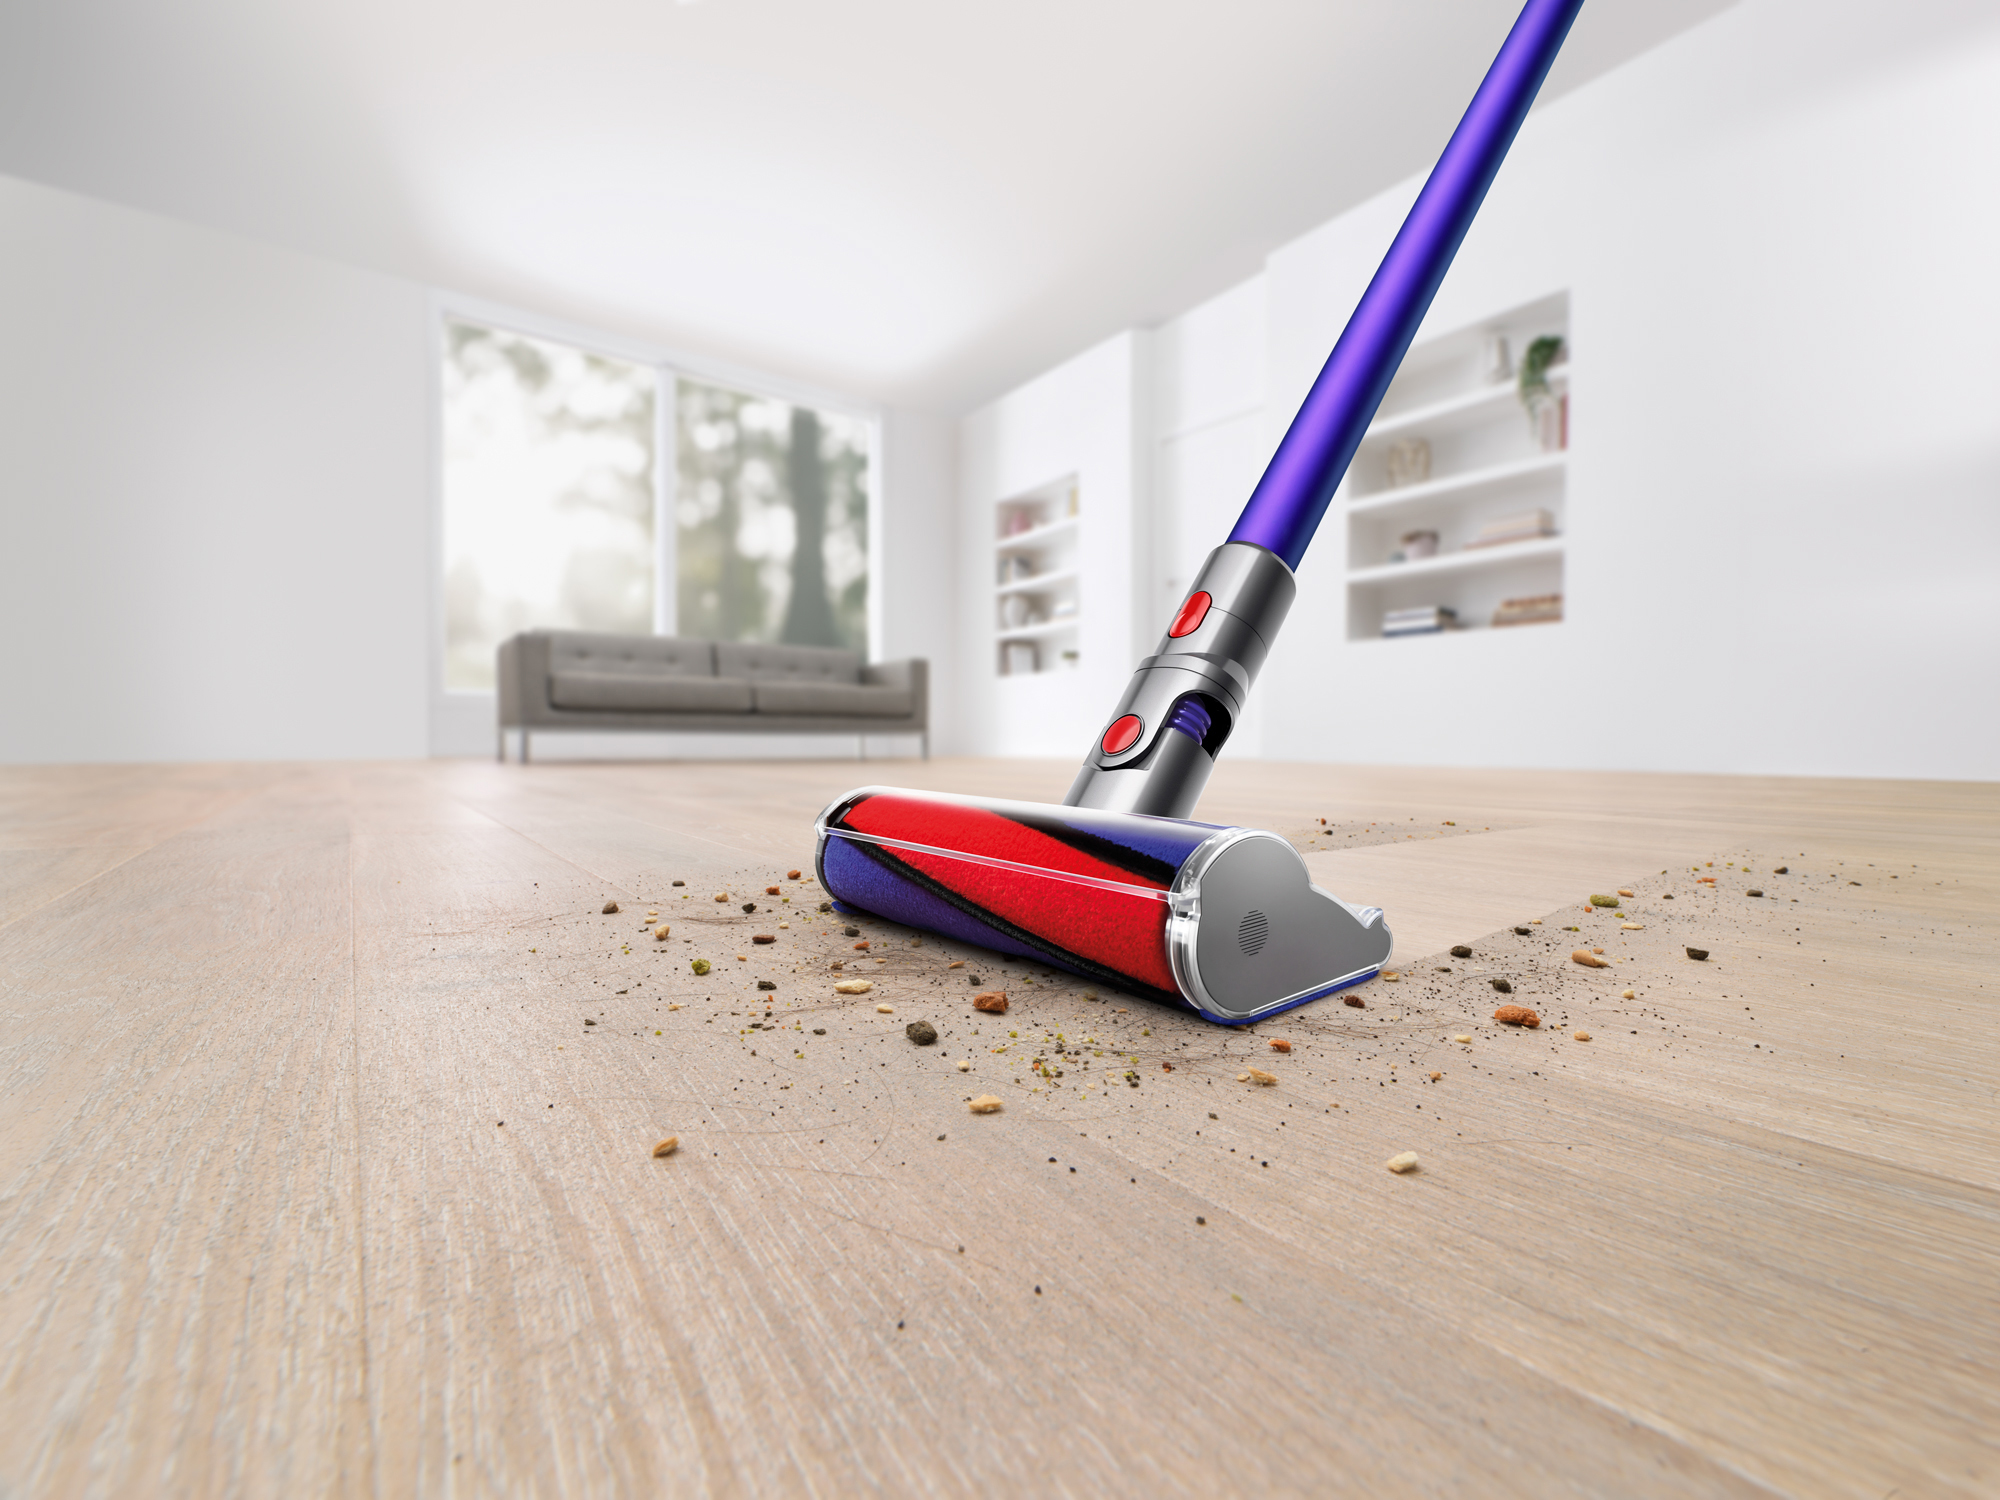 The Dyson V11 Absolute Pro Cordless Stick Vacuum is shown cleaning a hardwood floor in a white room. It makes a clean sweep through the dust and debris on the floor, leaving nothing behind it.